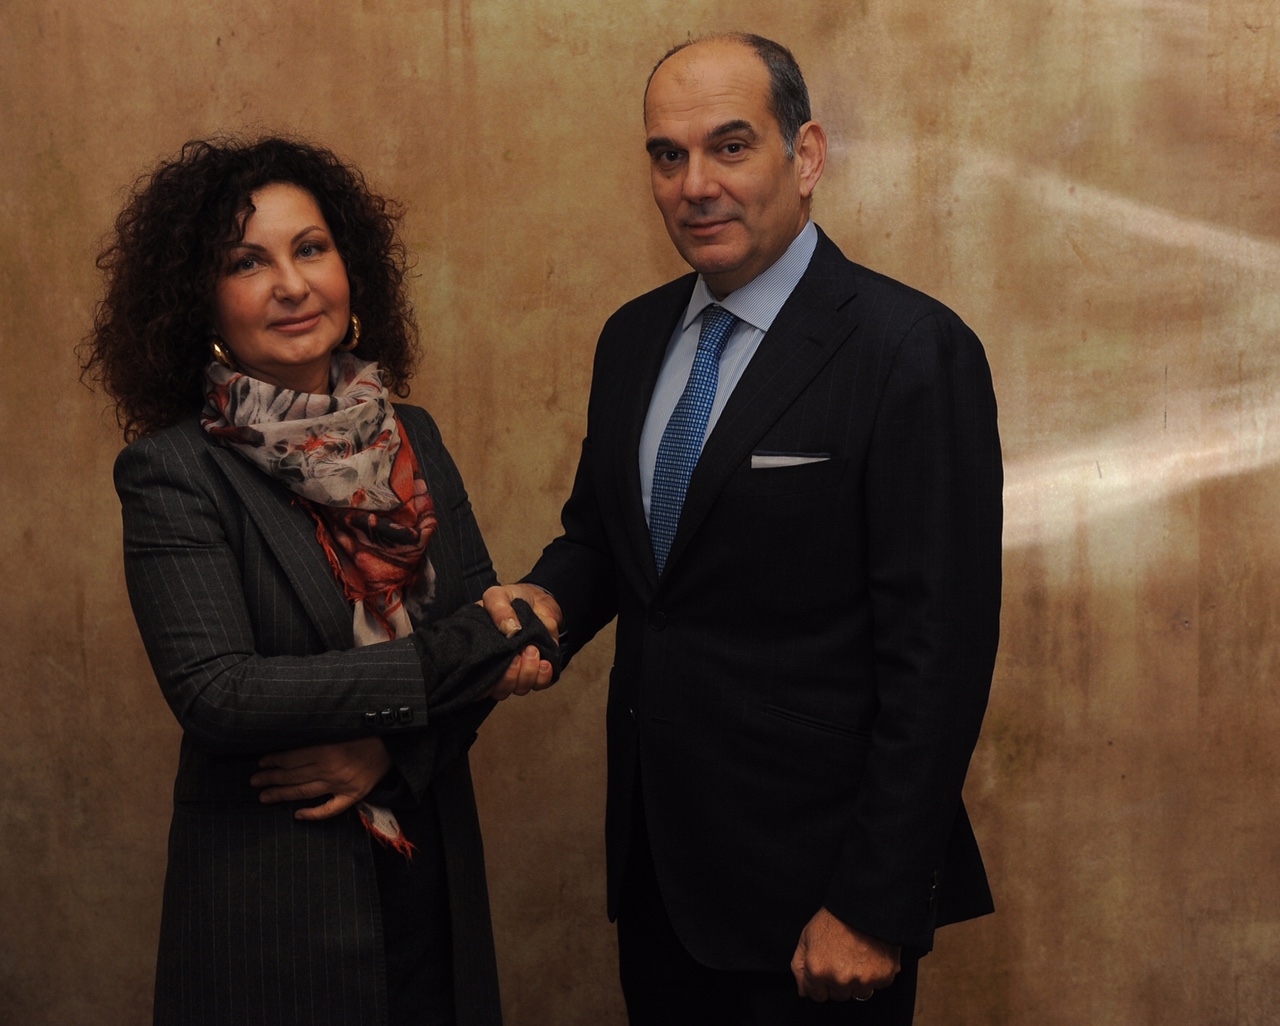 Here, Sonia Bonfiglioli poses with Enrico Carraro after O&K Antriebstechnik agreement.